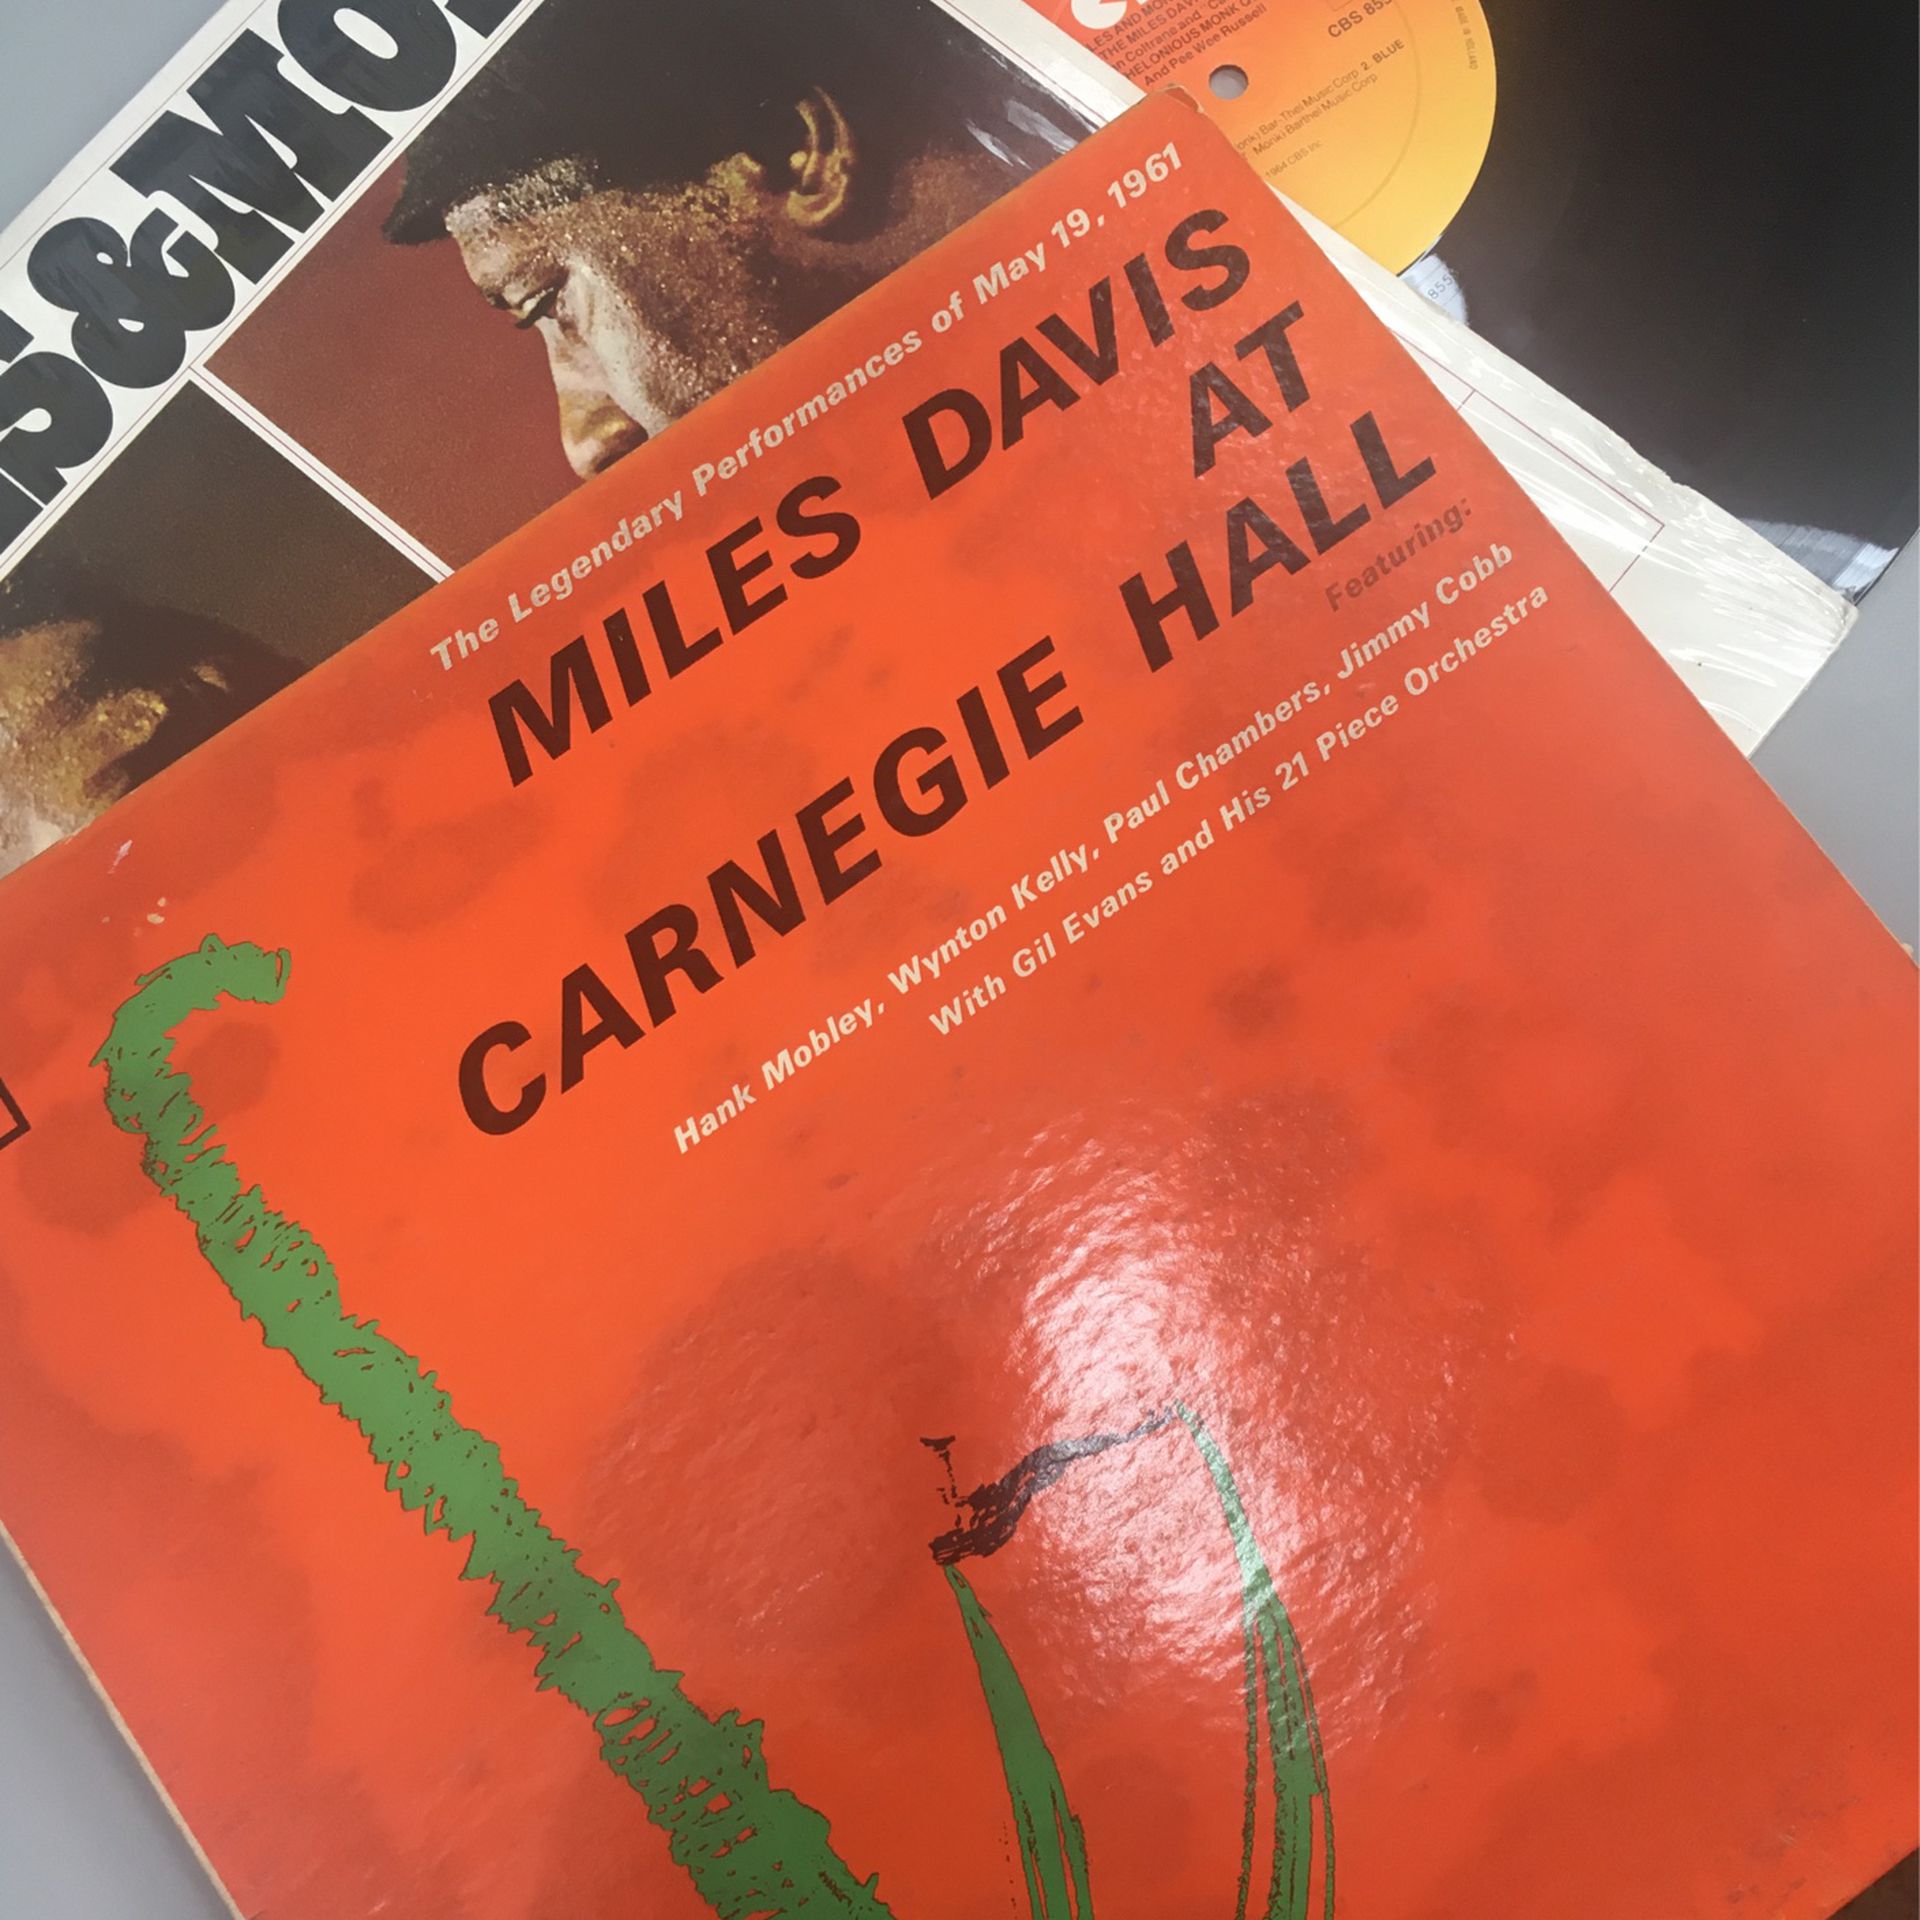 Miles Davis At Carnegie Hall, Birth Of The Cool, Miles And Monk At Newport -LP Bundle